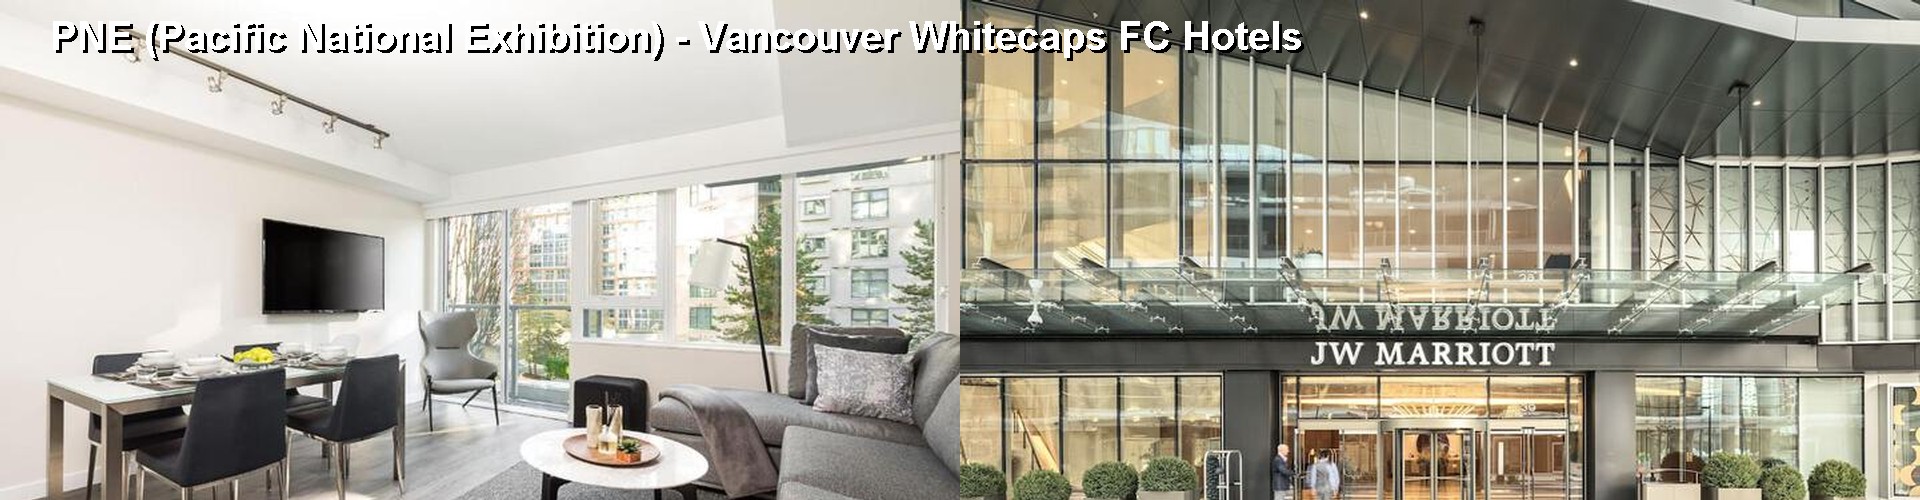 5 Best Hotels near PNE (Pacific National Exhibition) - Vancouver Whitecaps FC